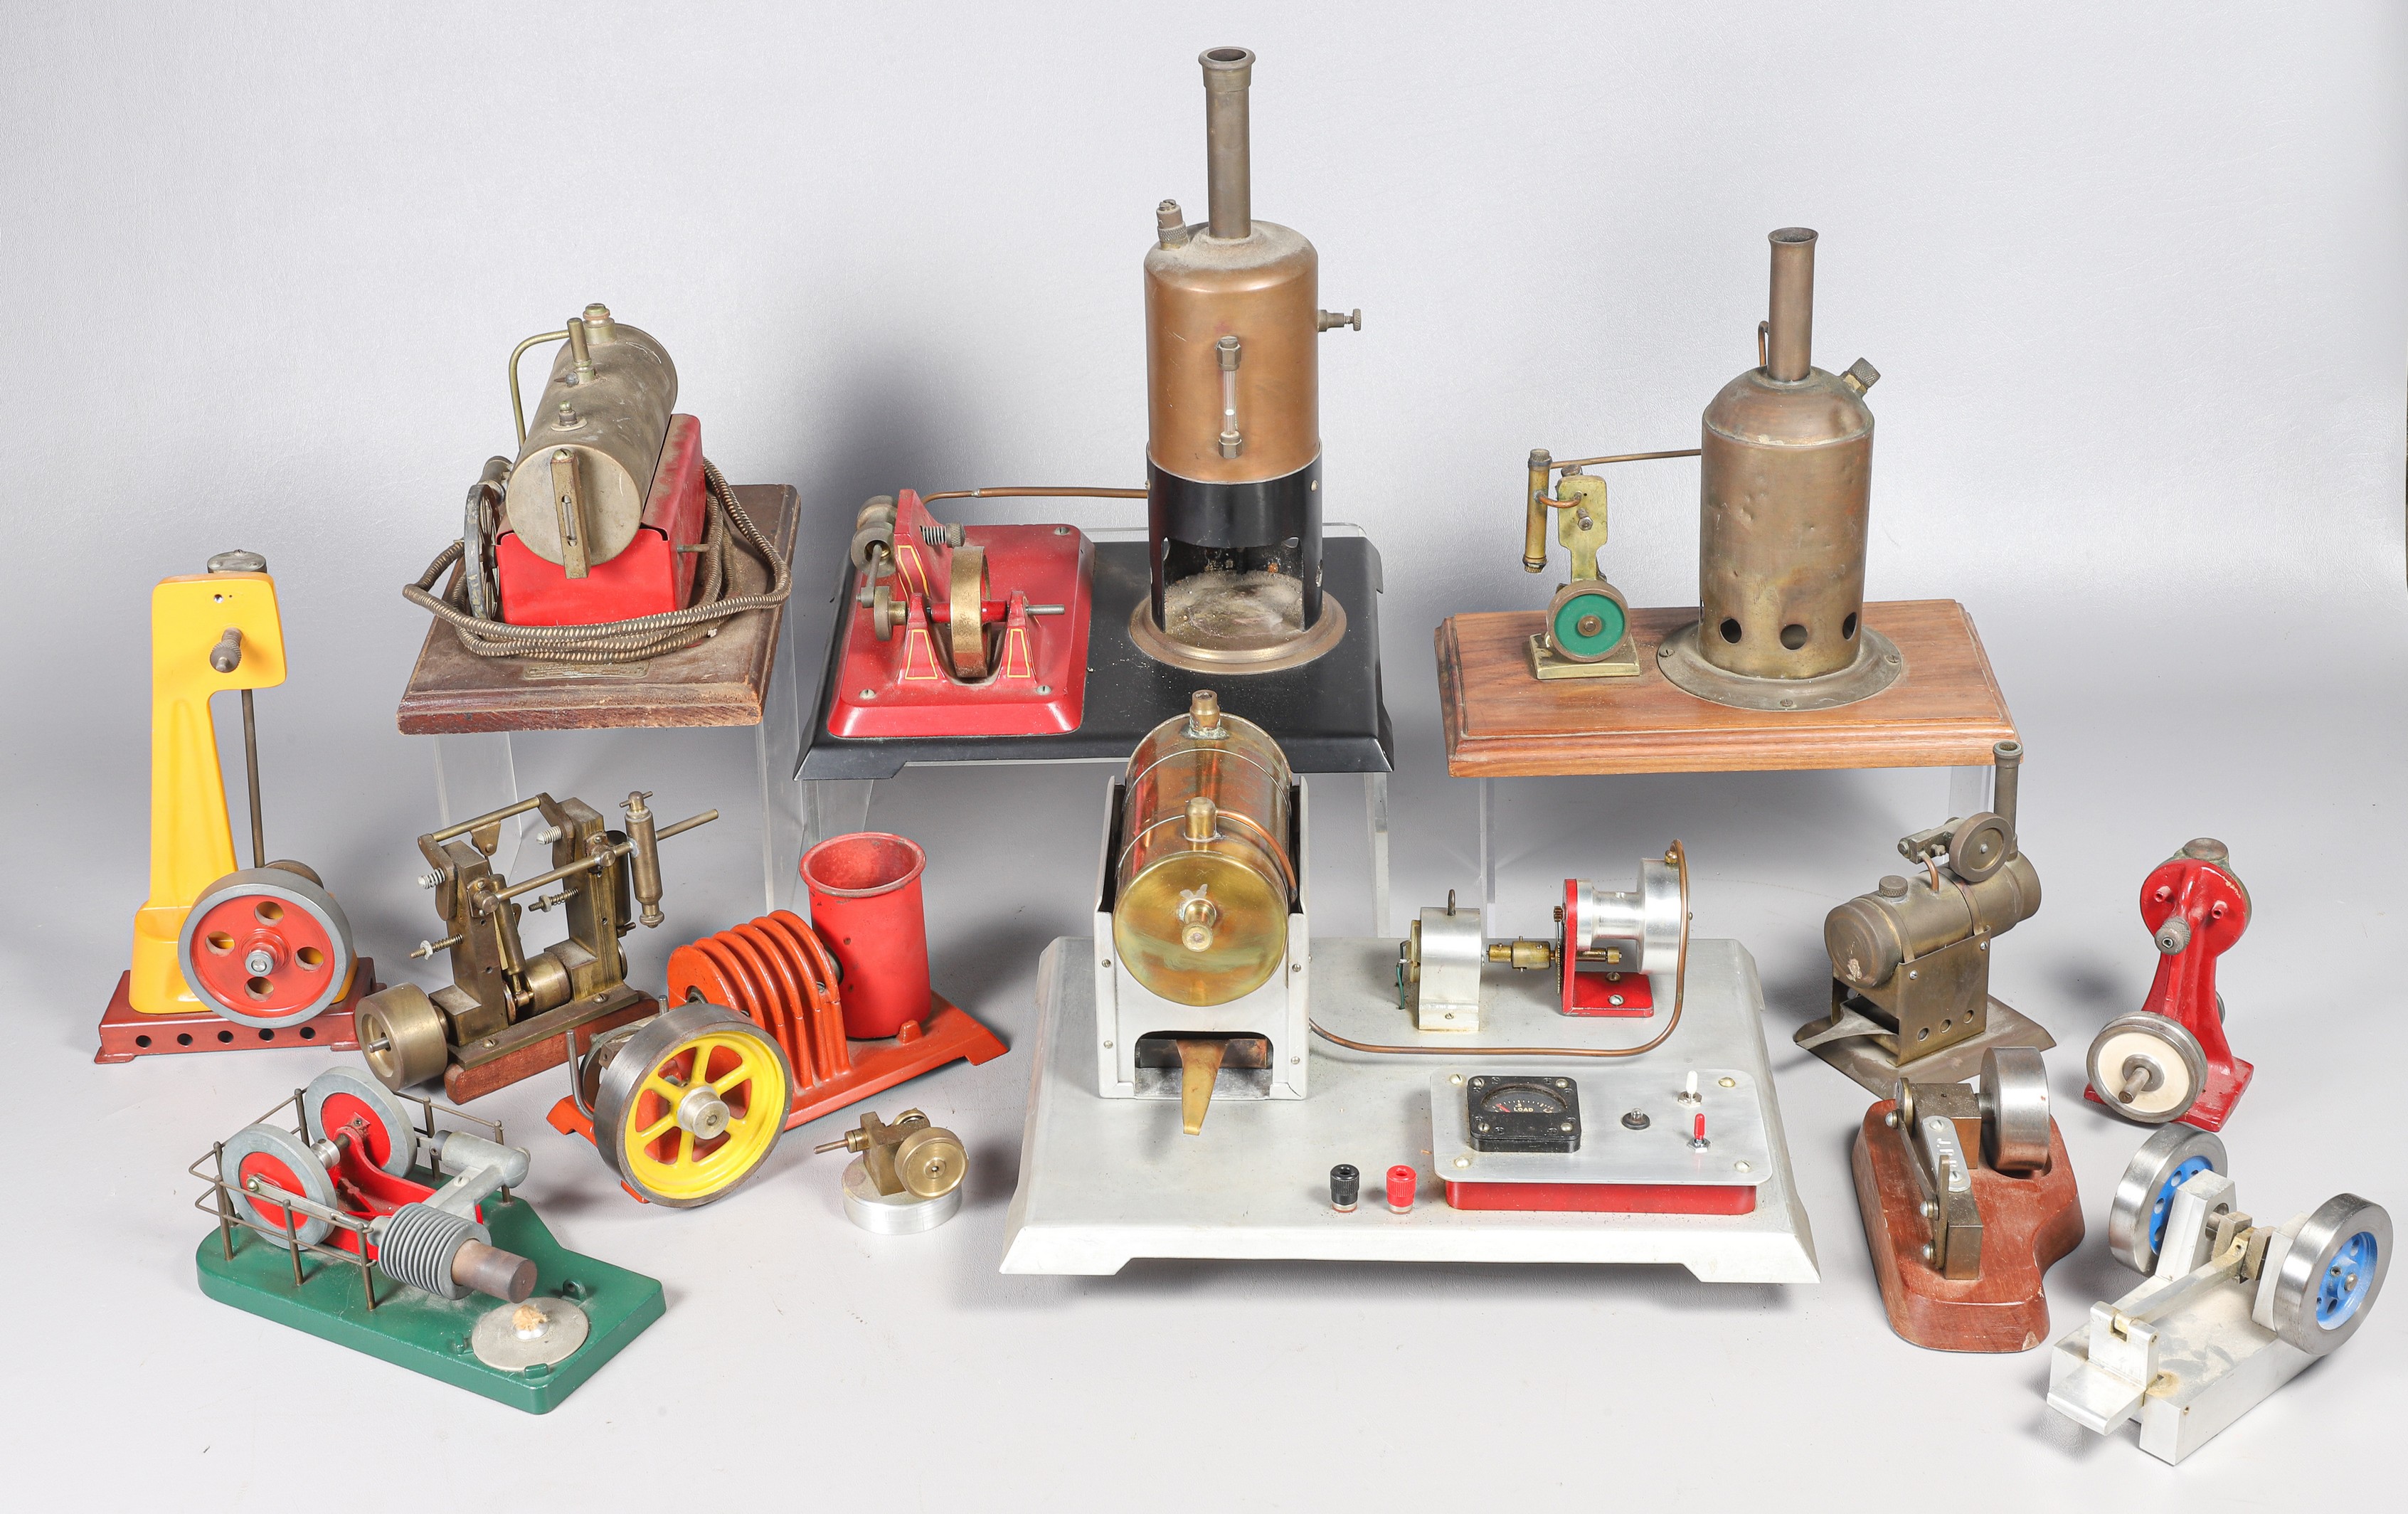 Patent model engines, assorted